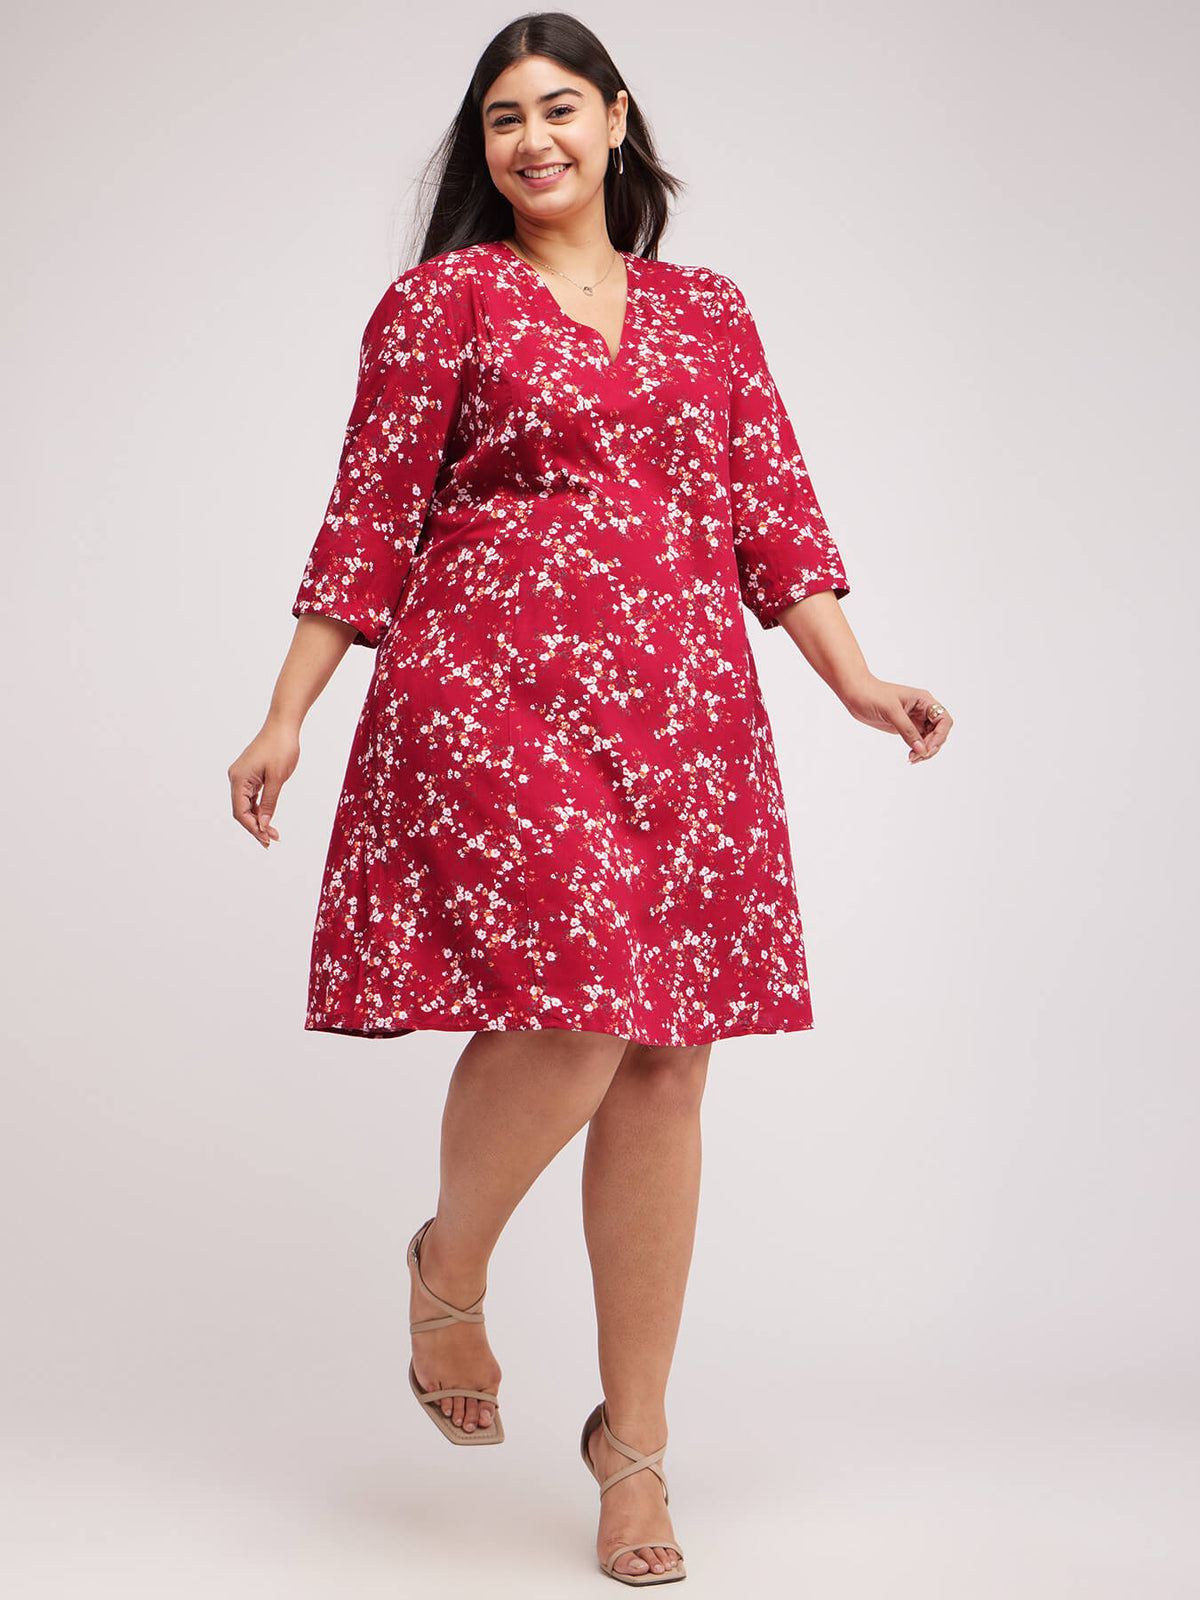 Floral Print A-line Dress - Red